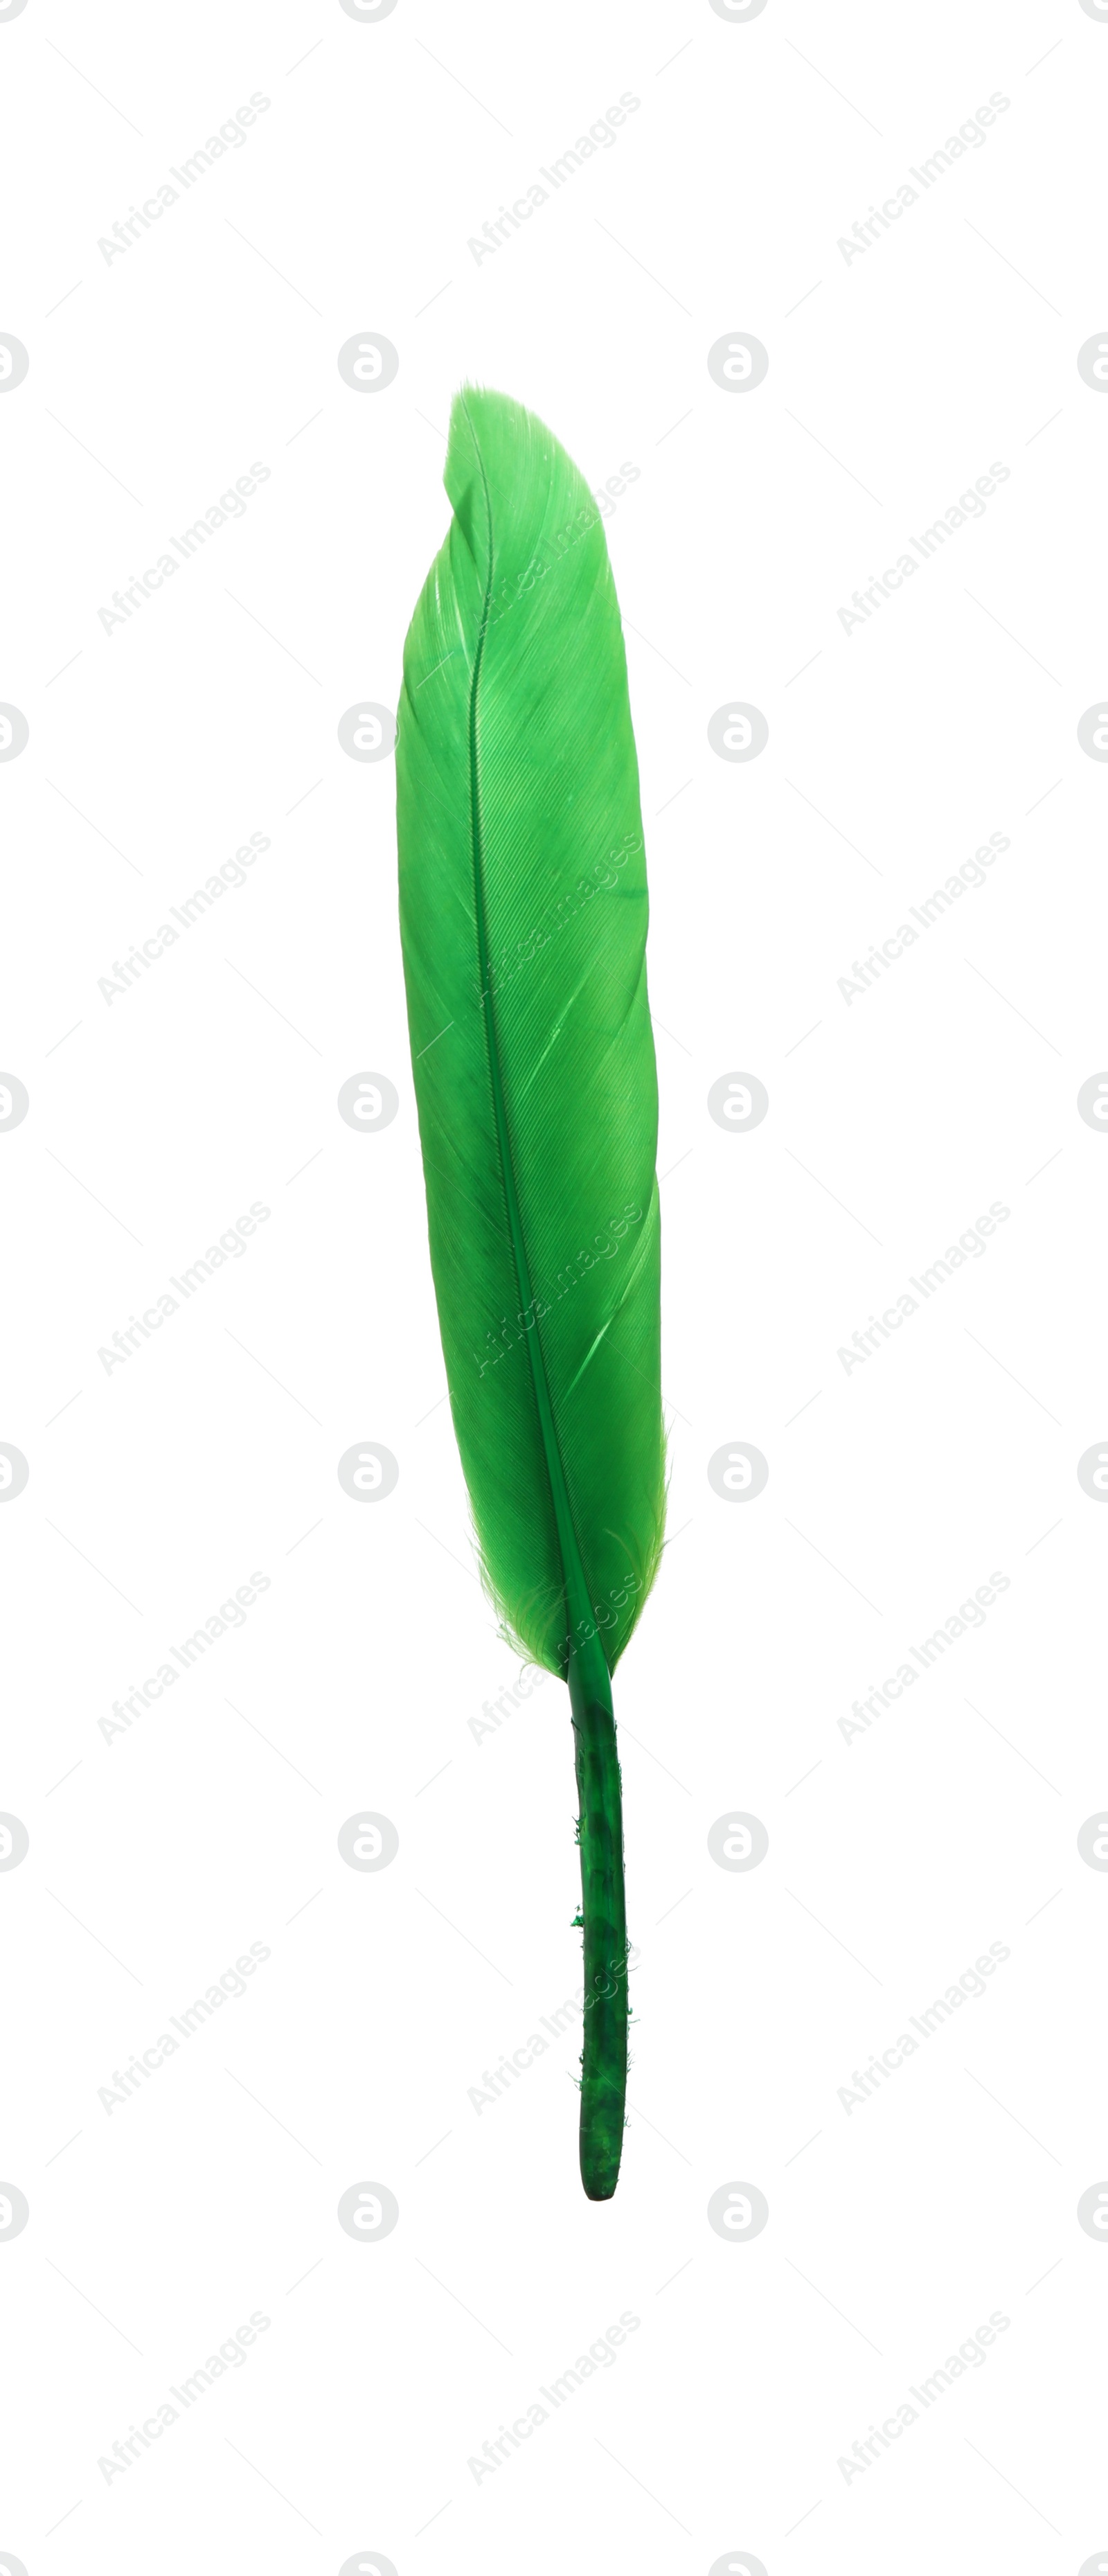 Photo of Fluffy beautiful green feather isolated on white